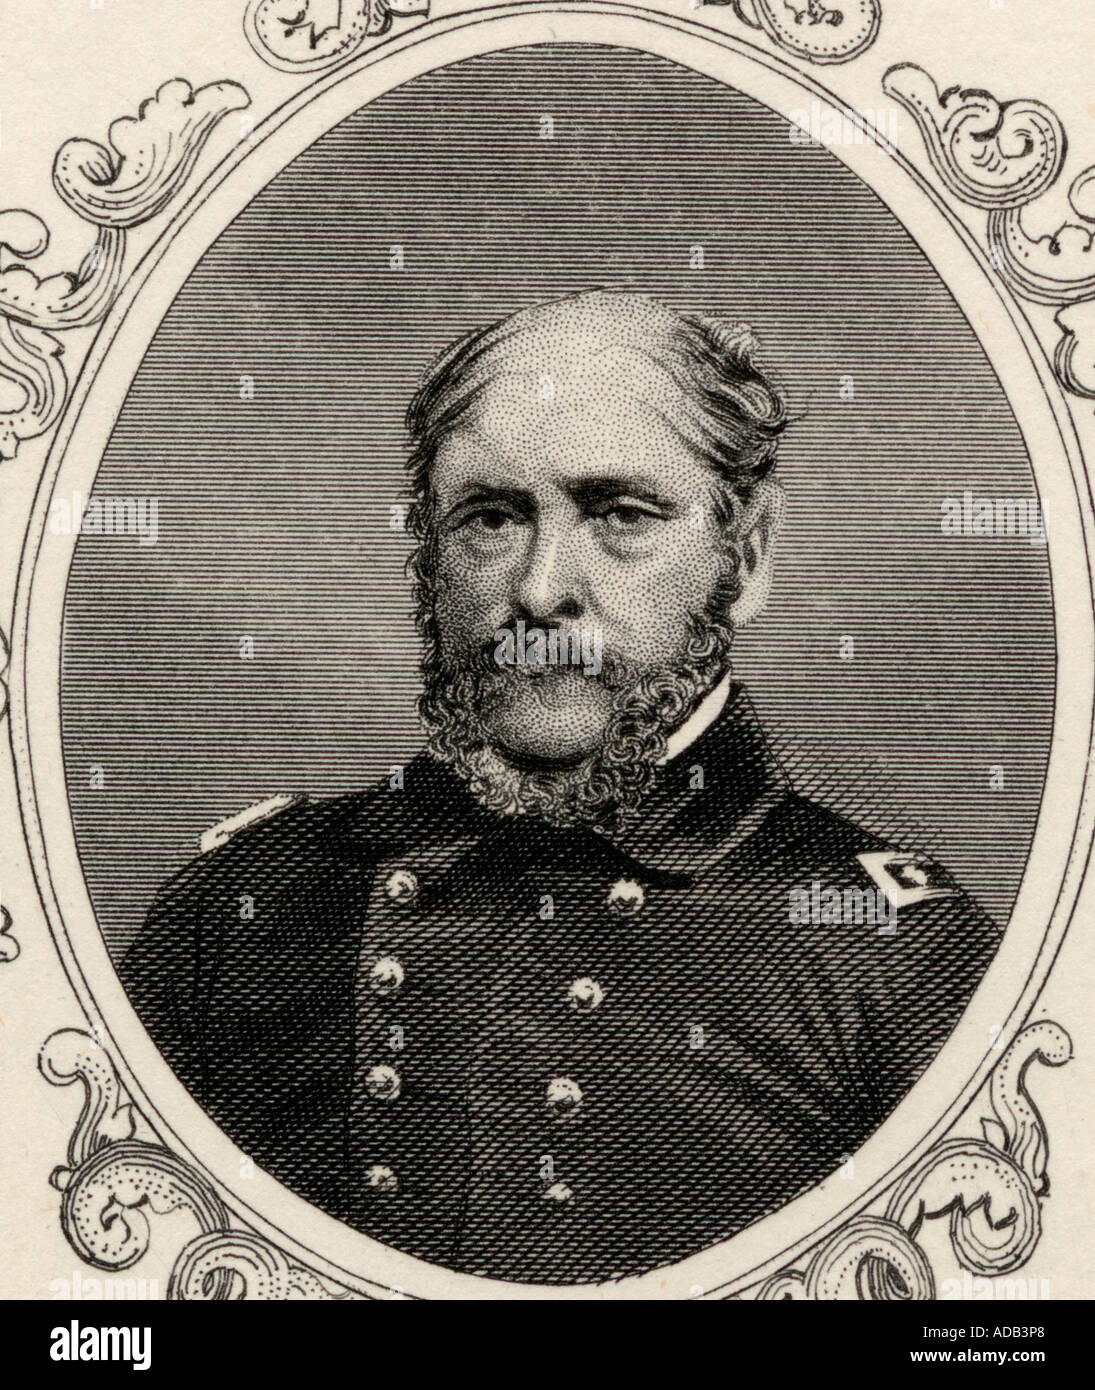 John Ancrum Winslow, 1811 - 1873. Union naval commander during the American Civil War. Rear Admiral in the United States Navy Stock Photo